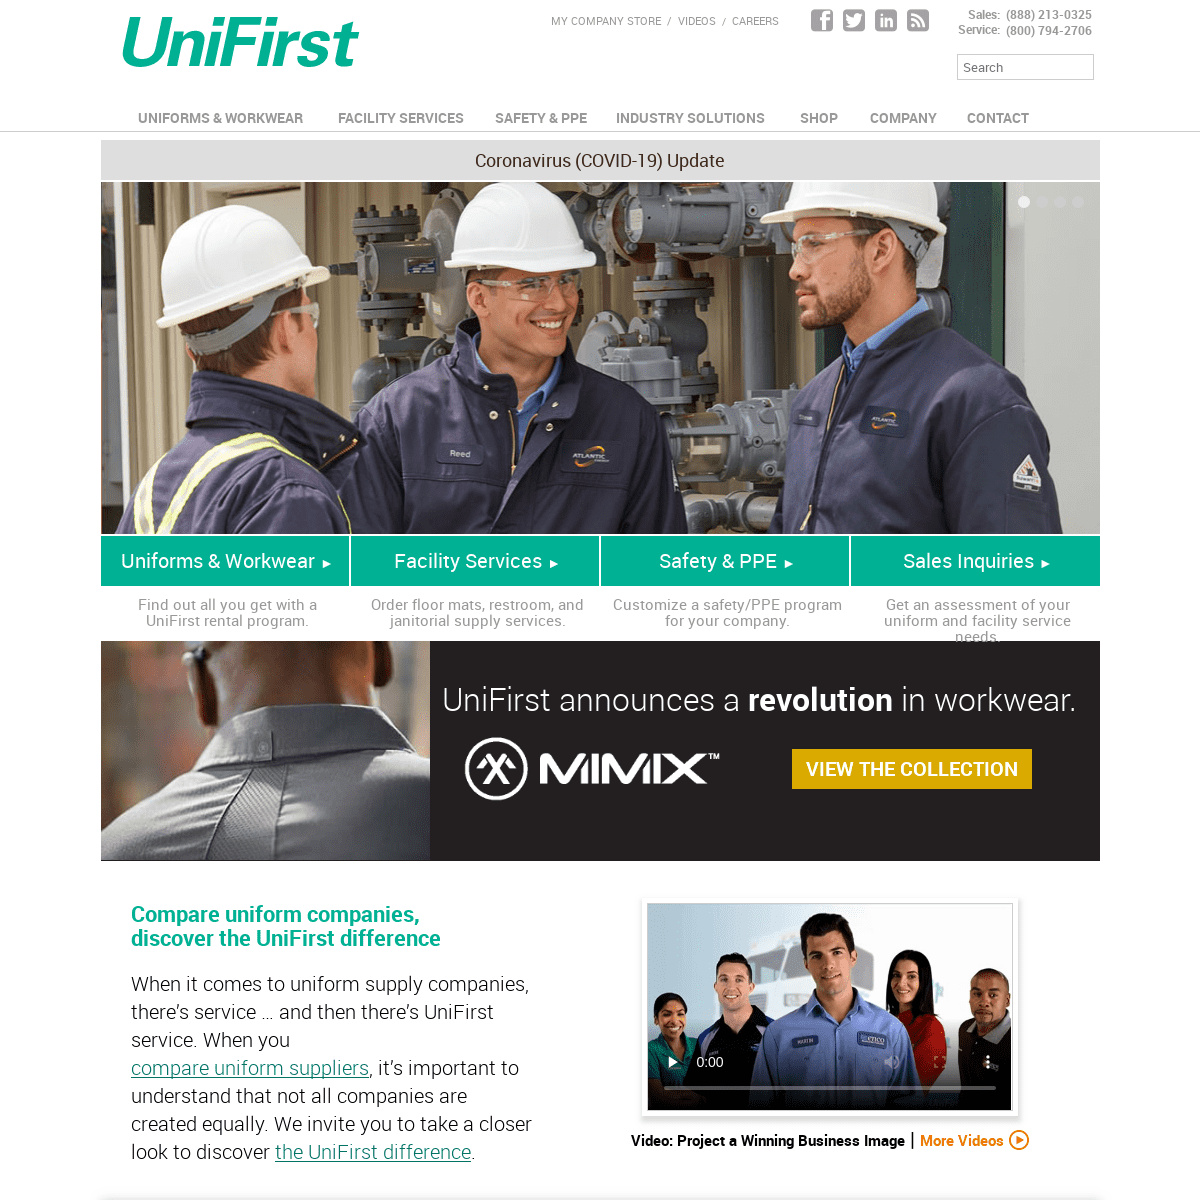 A complete backup of unifirst.com